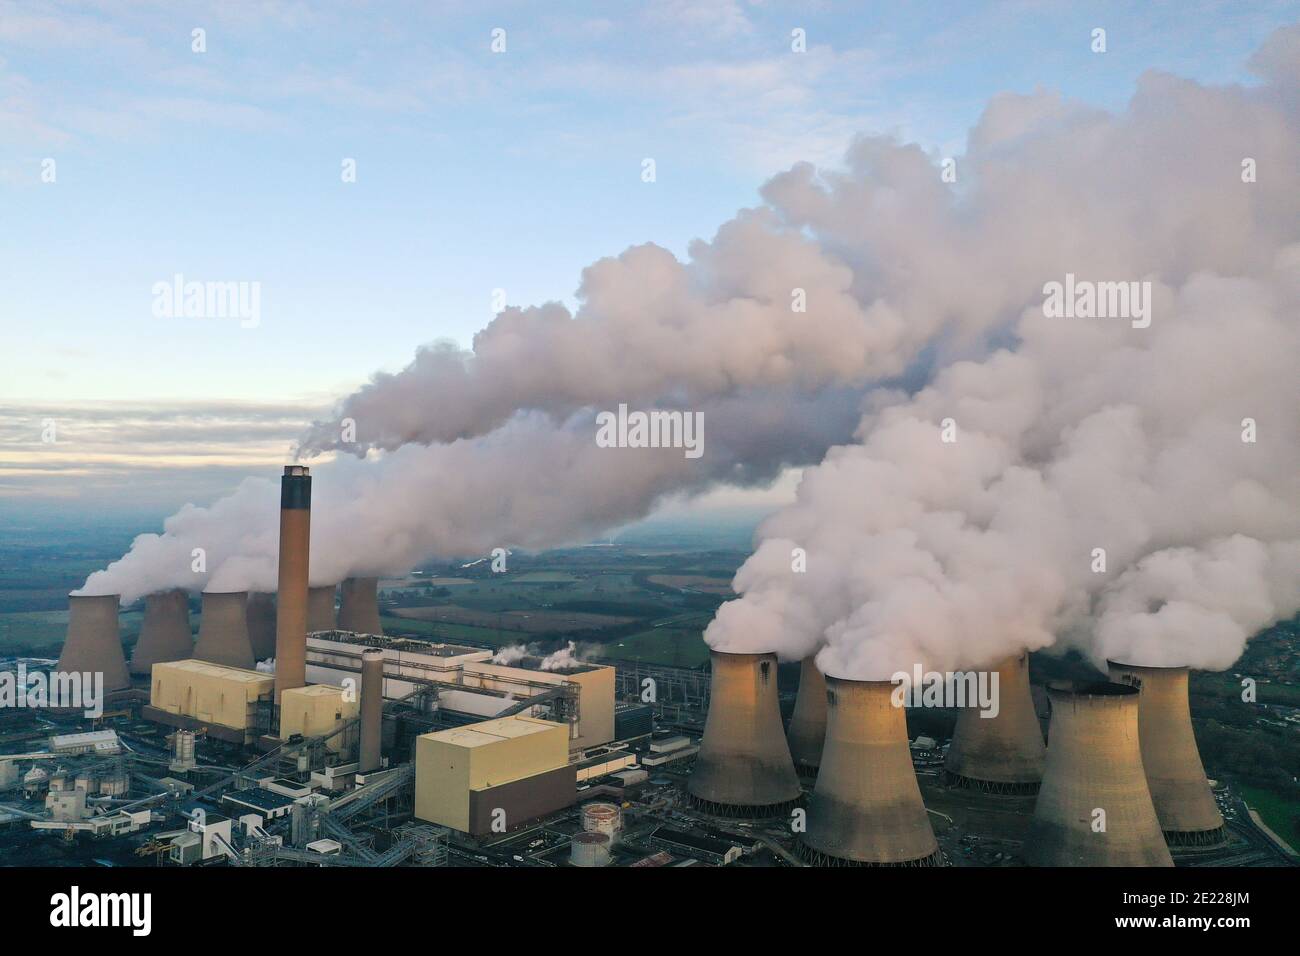 DRAX POWER STATION, YORKSHIRE, UK - JANUARY 7, 2021.  An aerial landscape image of Drax Coal Fired Power Station pumping steam and smoke from its chim Stock Photo